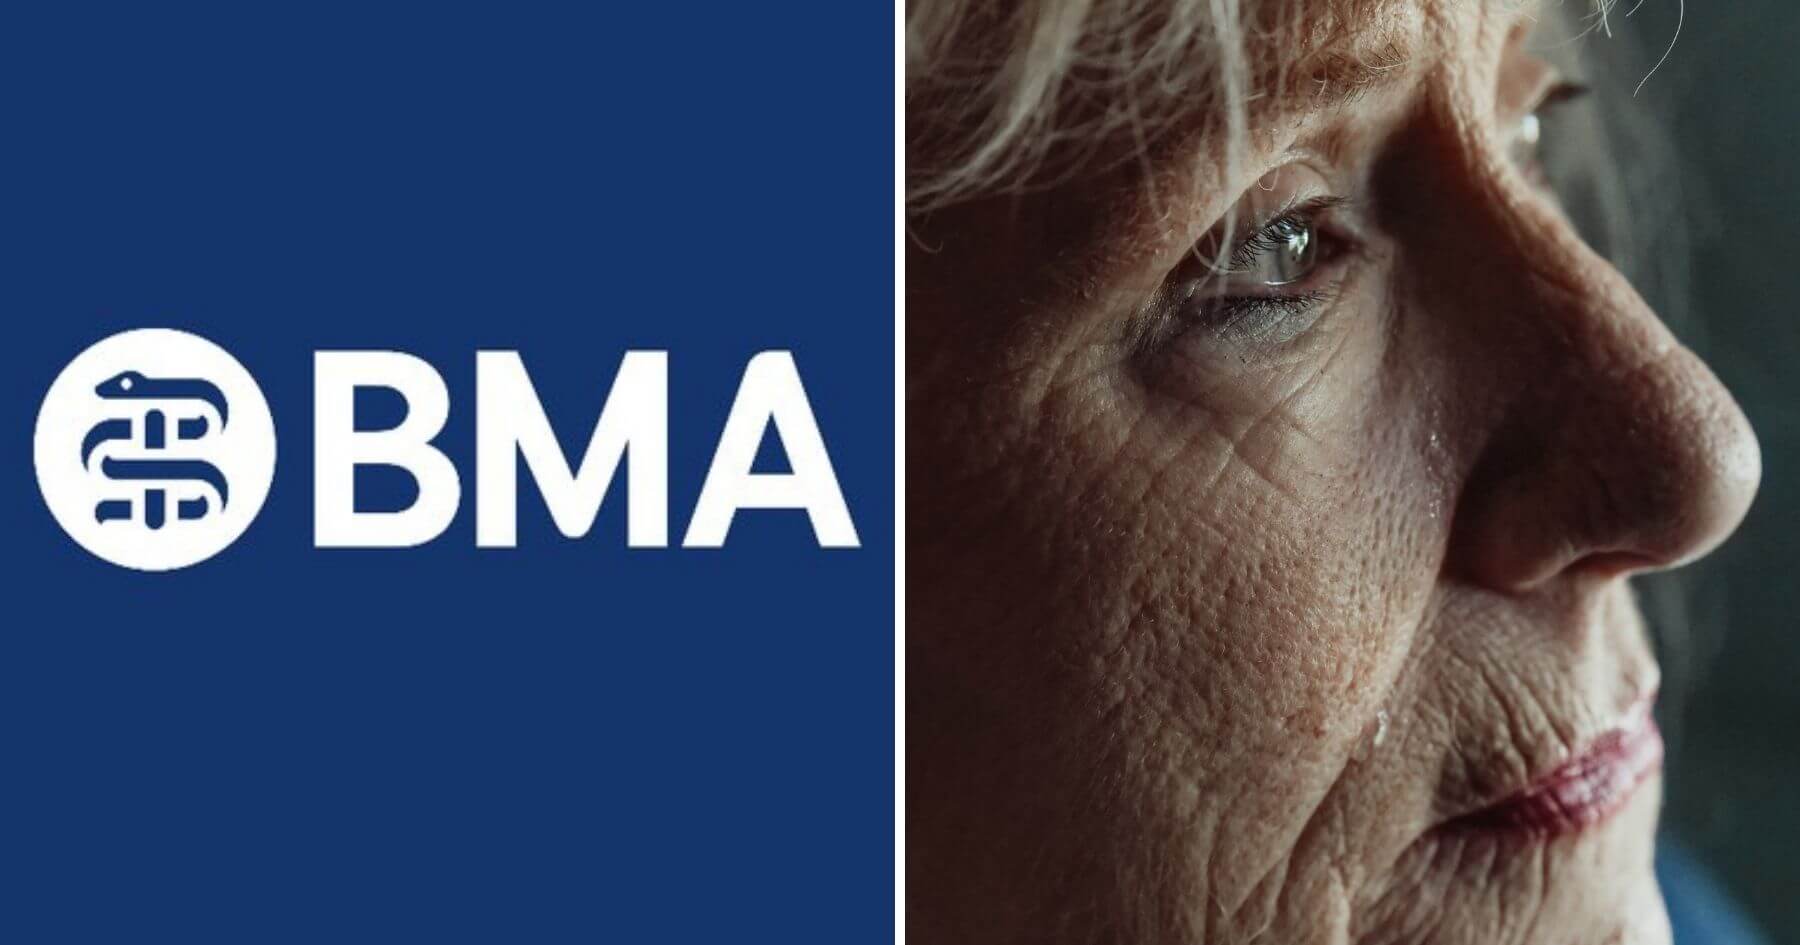 BMA decides by just 4 votes to go neutral on assisted suicide